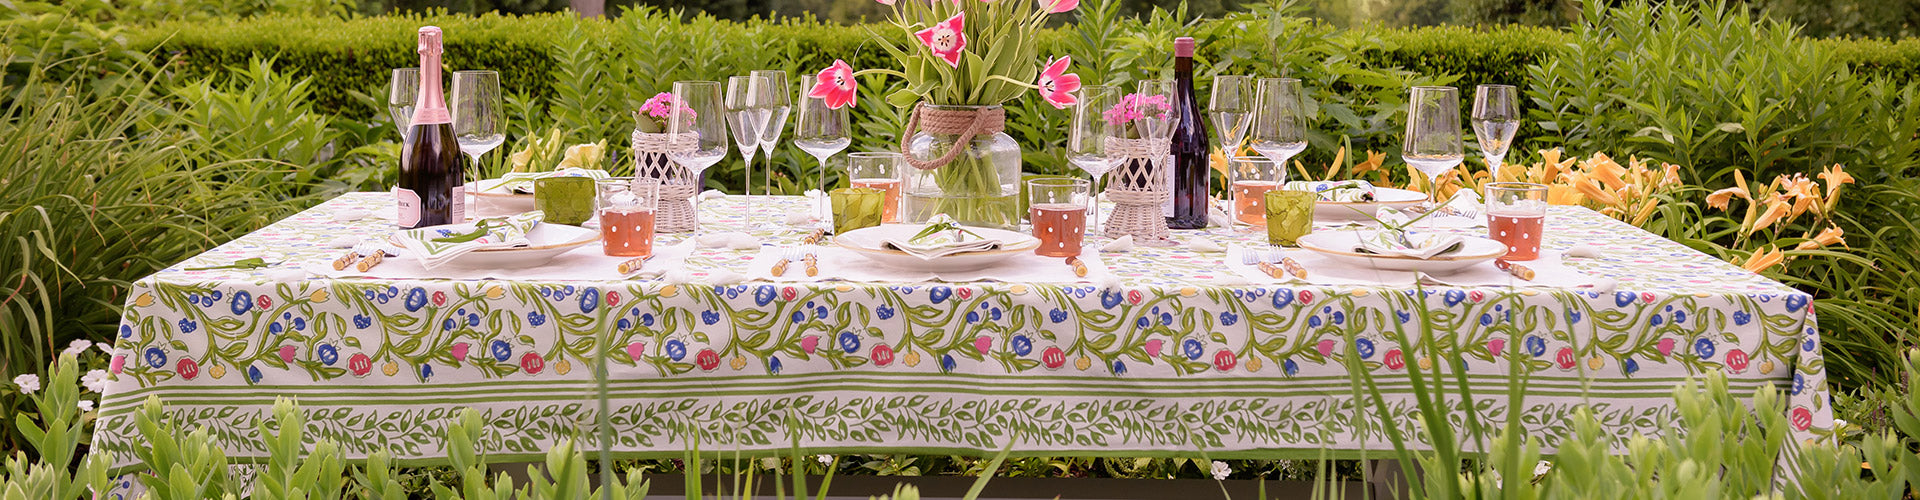 Table Linens & Home Accessories | Pomegranate Inc.